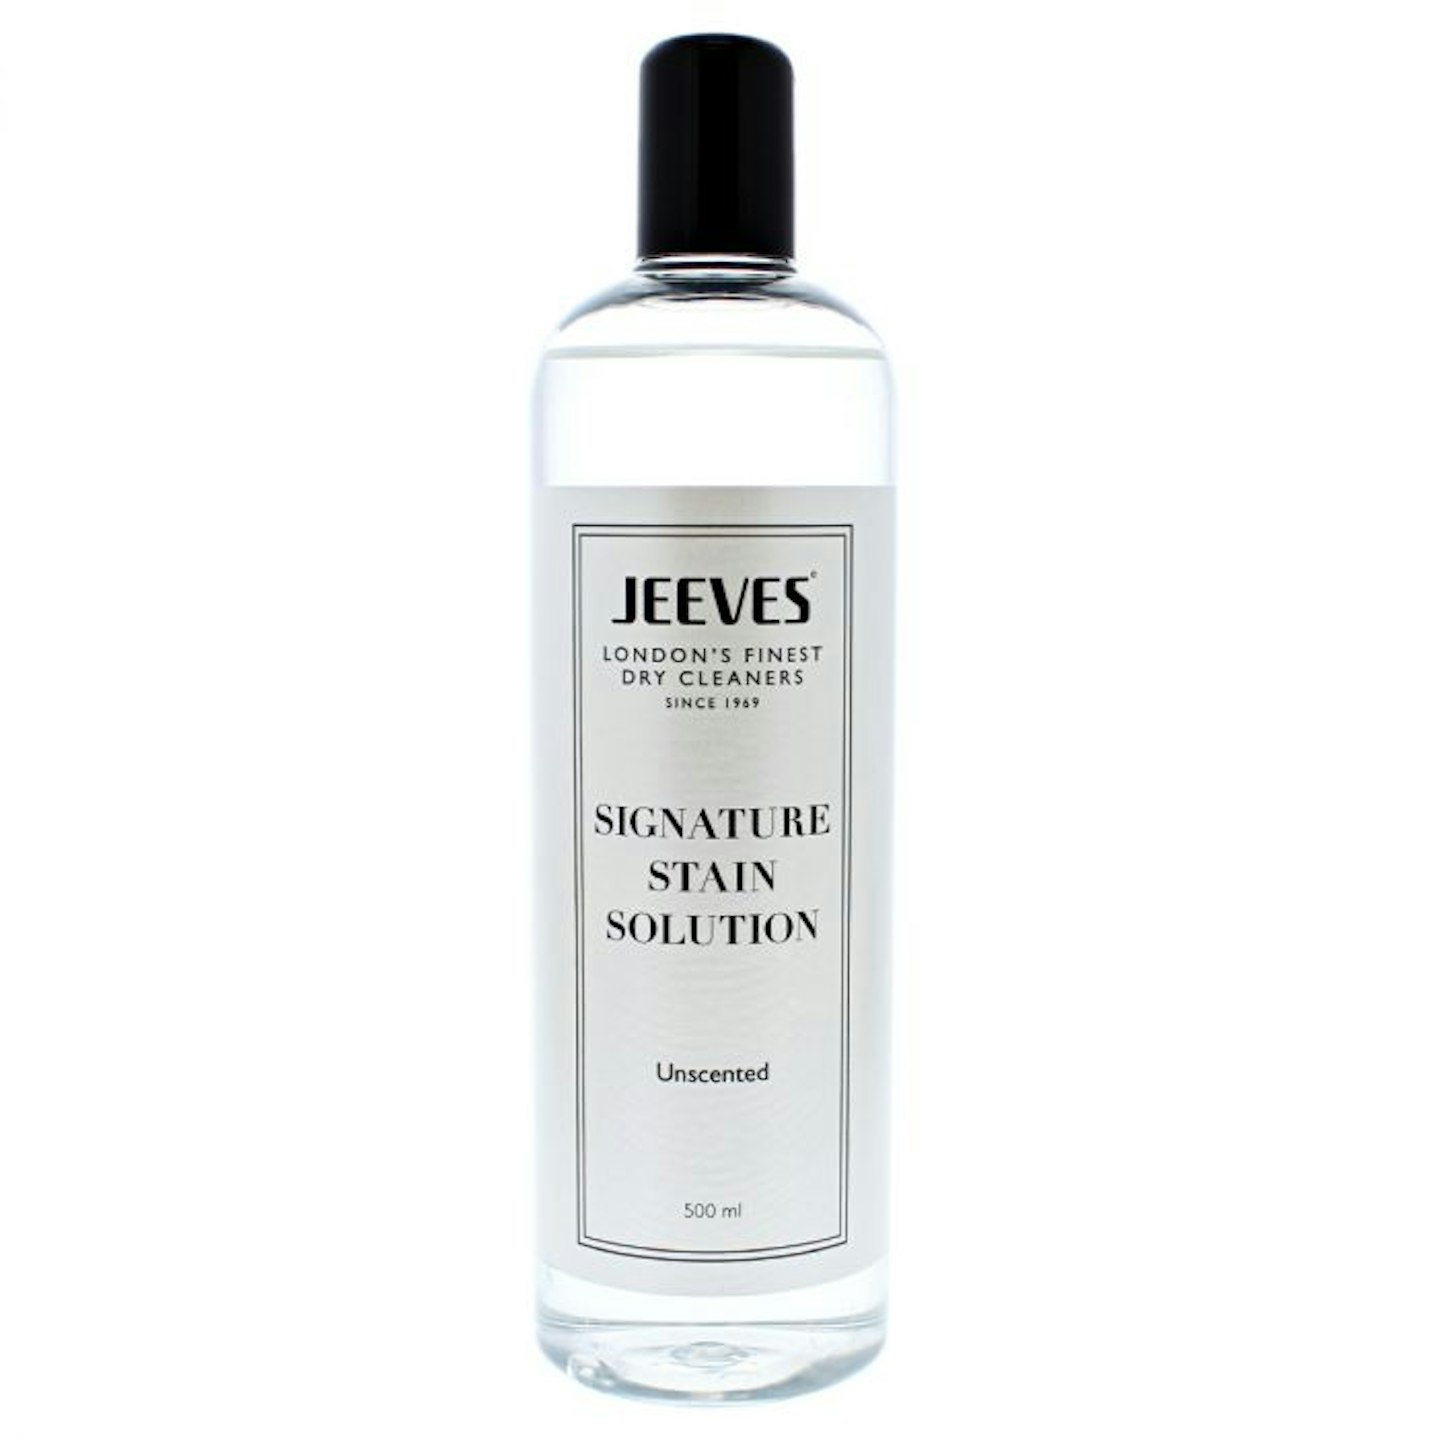 Jeeves, Signature Stain Solution, £15.99